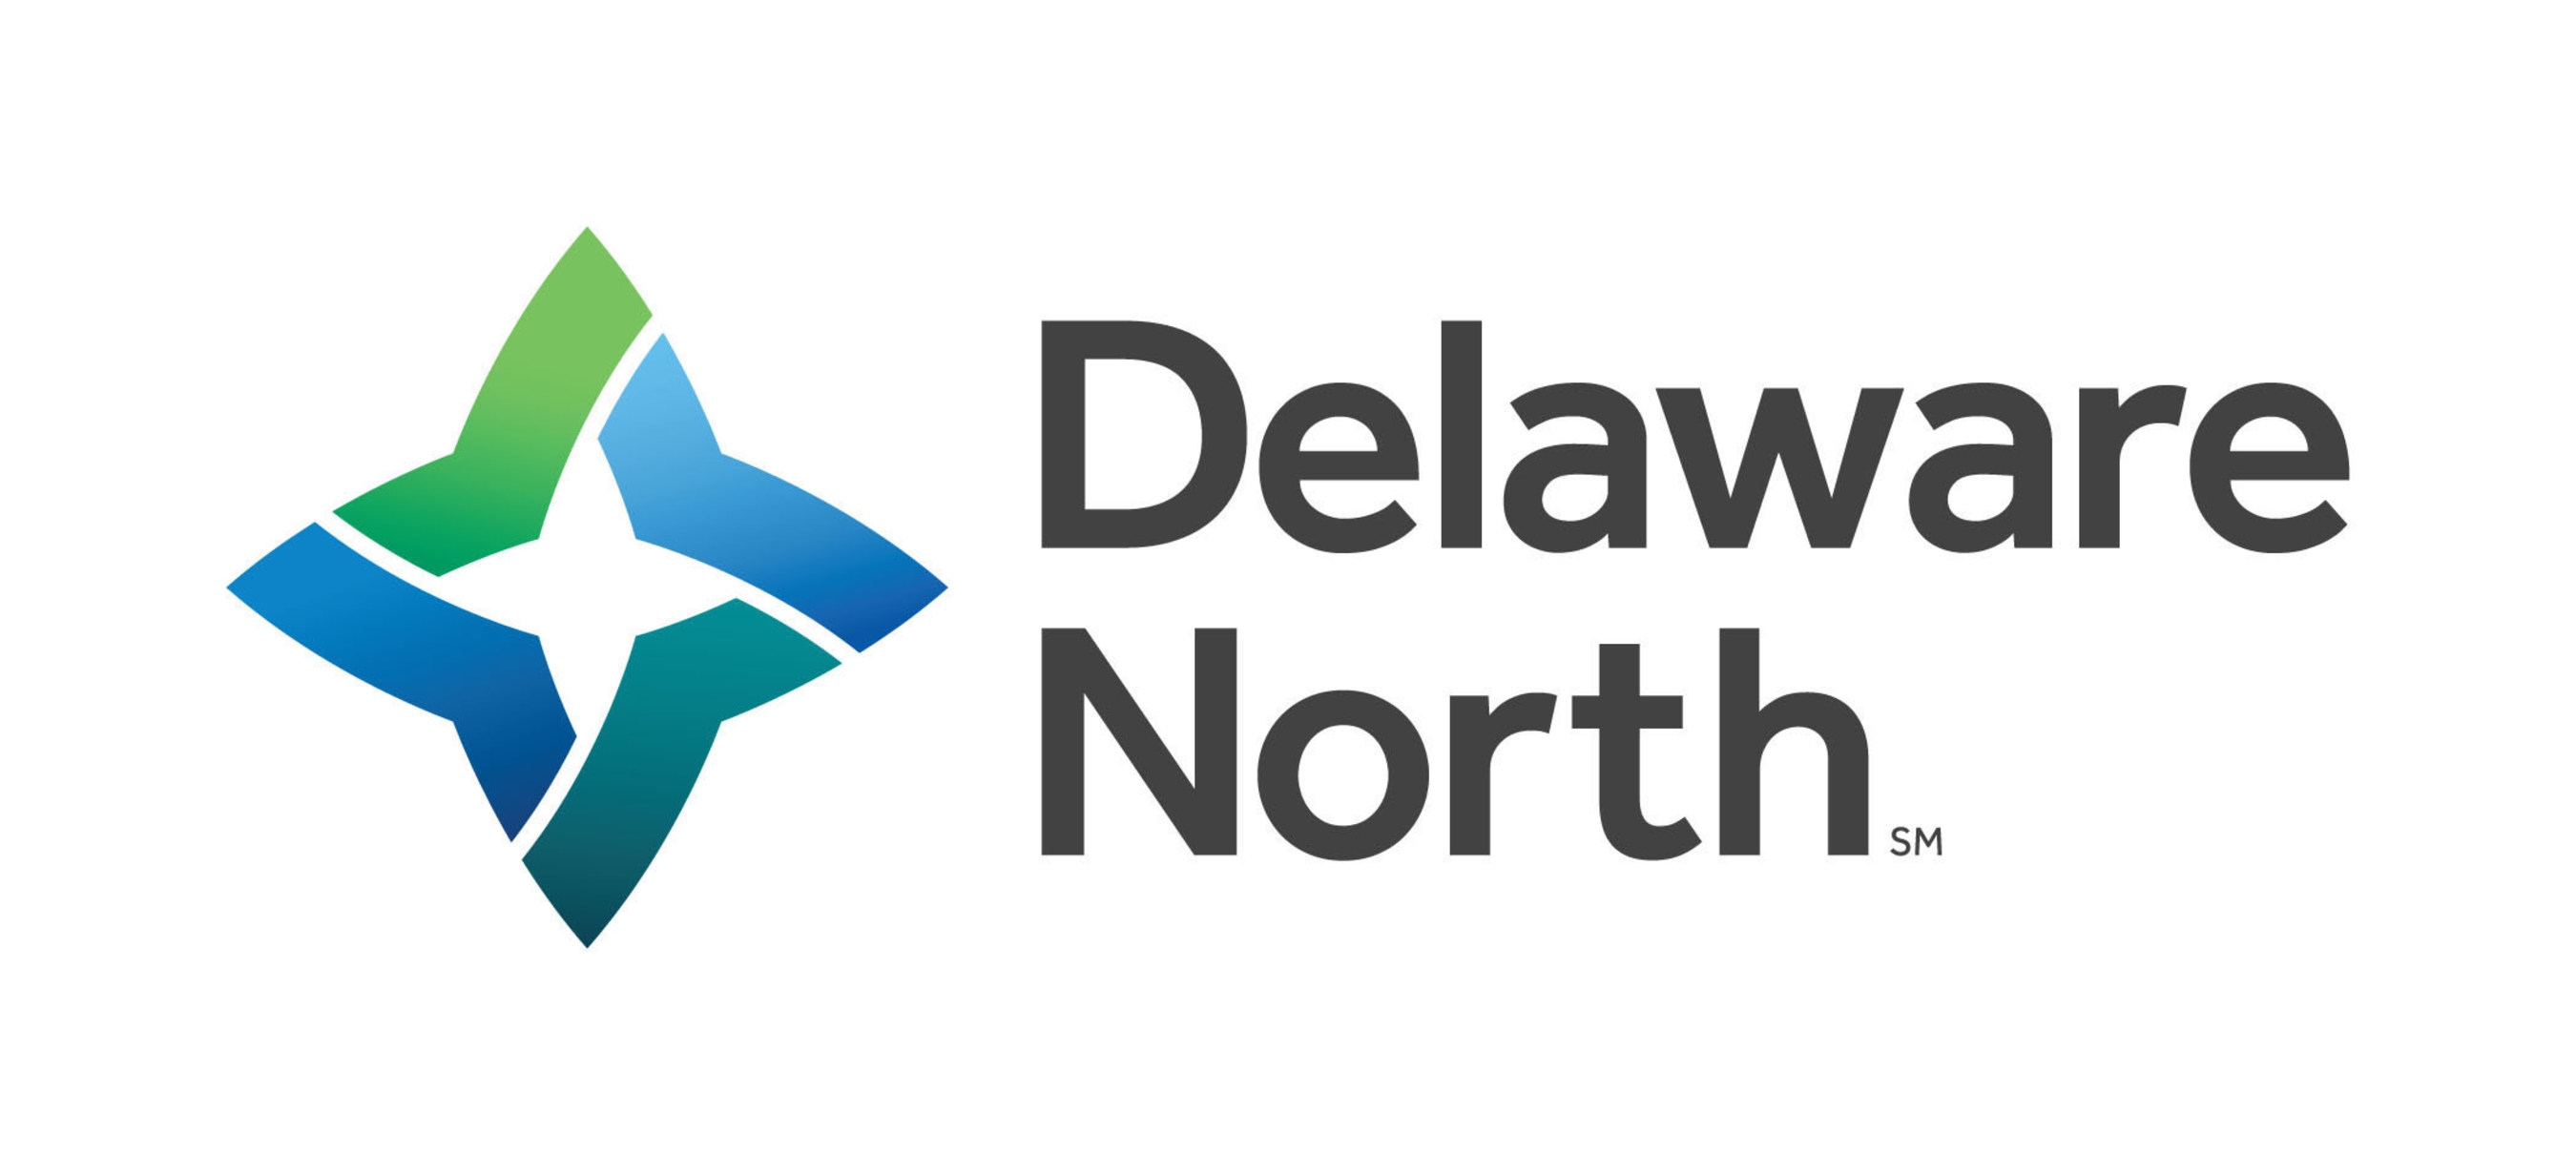 Delaware North, founded and owned by the Jacobs family for 100 years, is a global leader in hospitality and food service with operations in the sports, travel hospitality, restaurants and catering, parks, resorts, gaming and specialty retail industries.